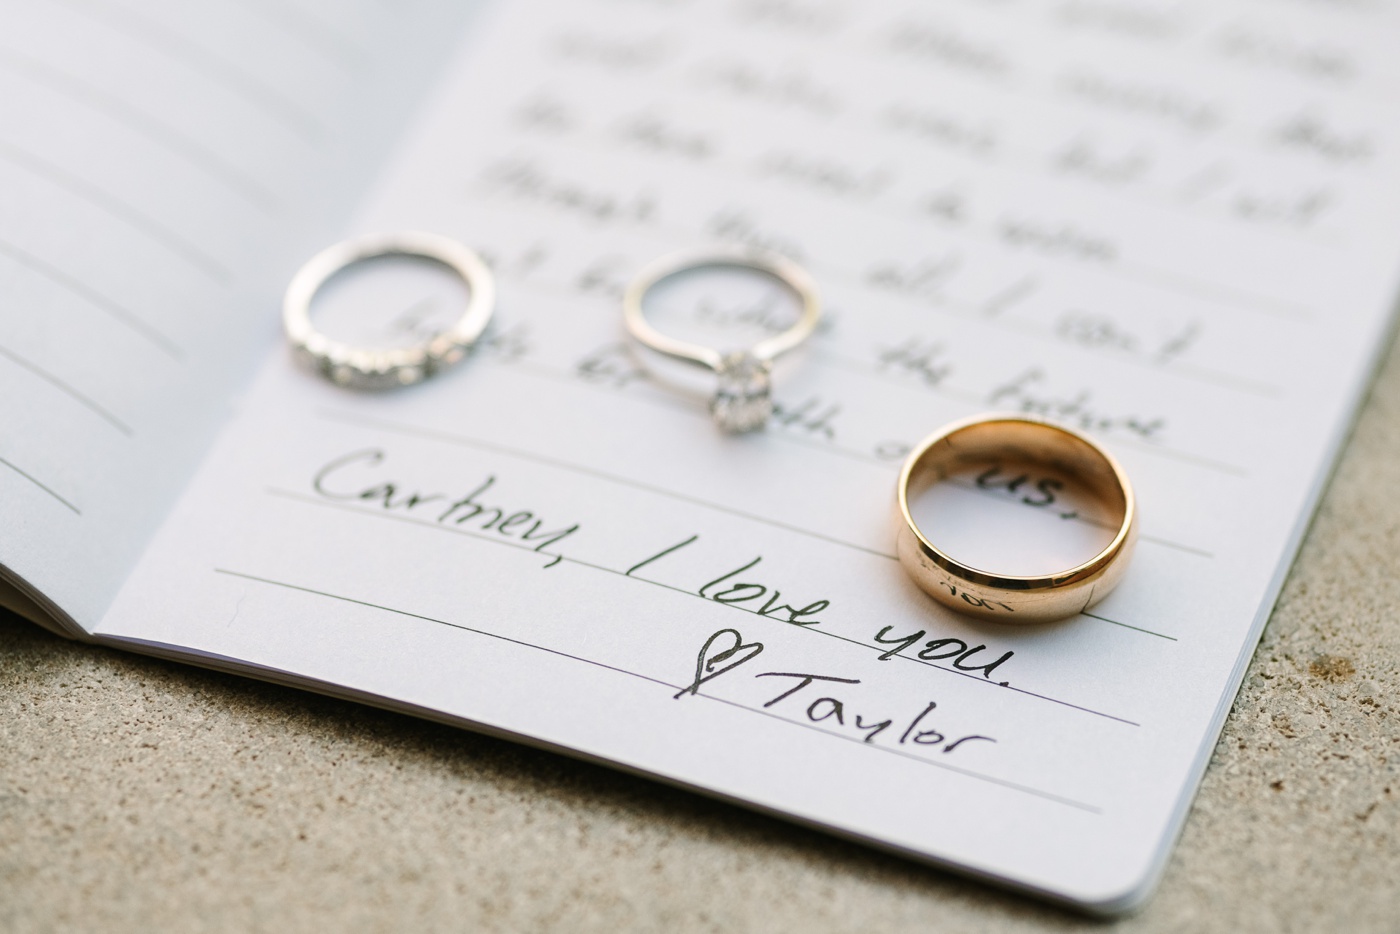 A groom's letter to his bride on their wedding day